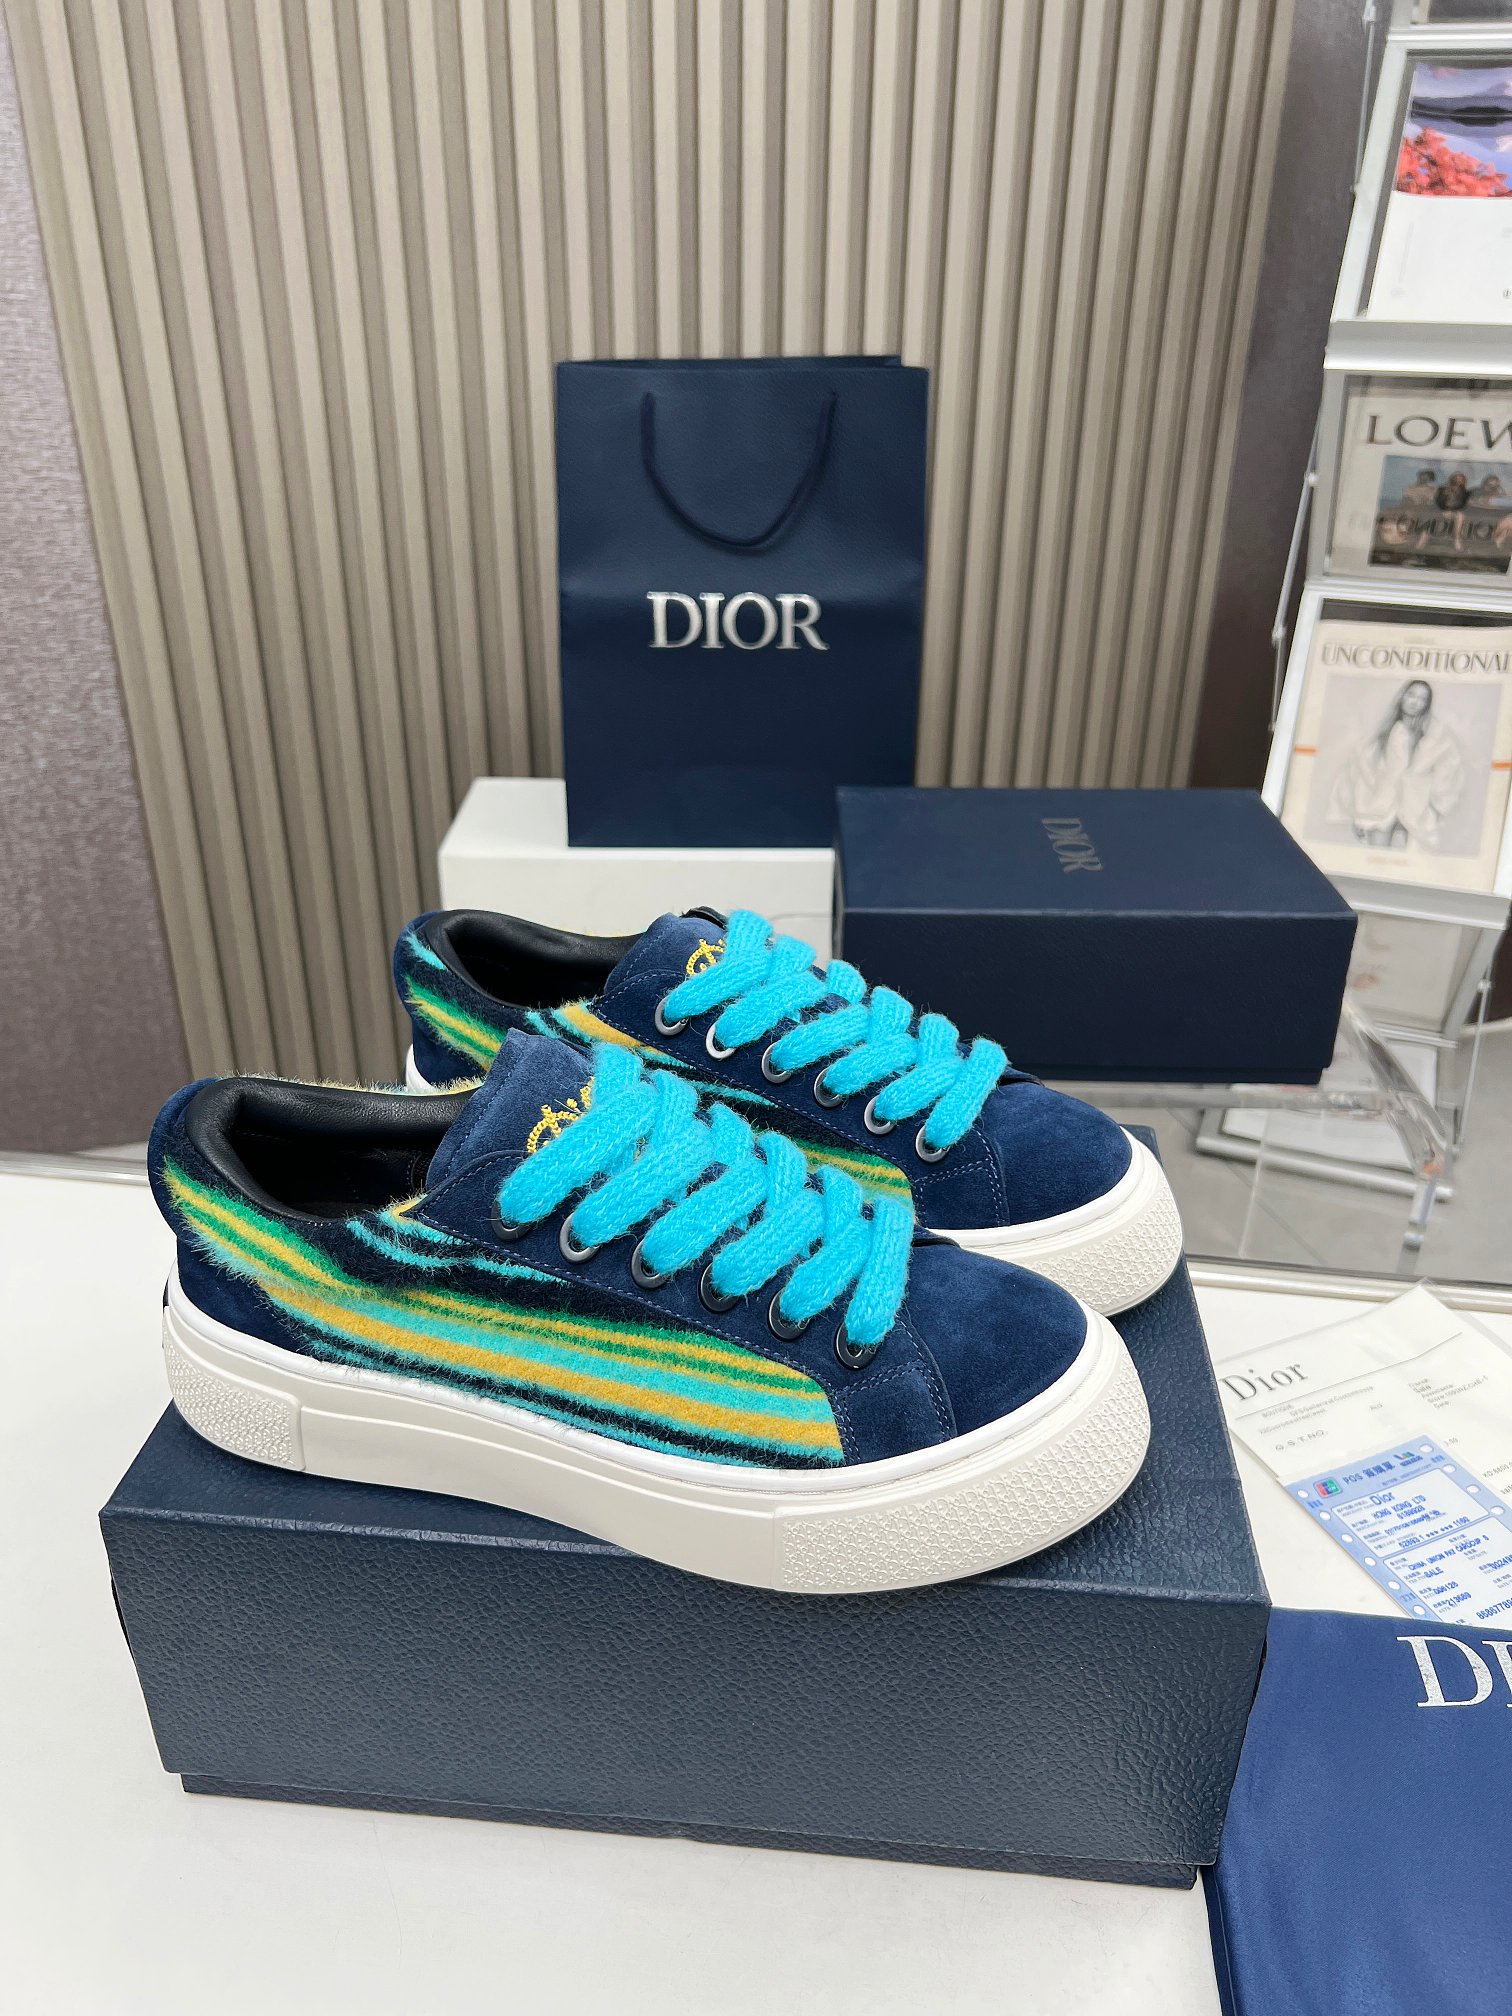 We Curate The Best
 Dior Sneakers Single Layer Shoes Brown White Yellow Embroidery Unisex Women Men Cowhide Knitting Rubber Oblique Casual